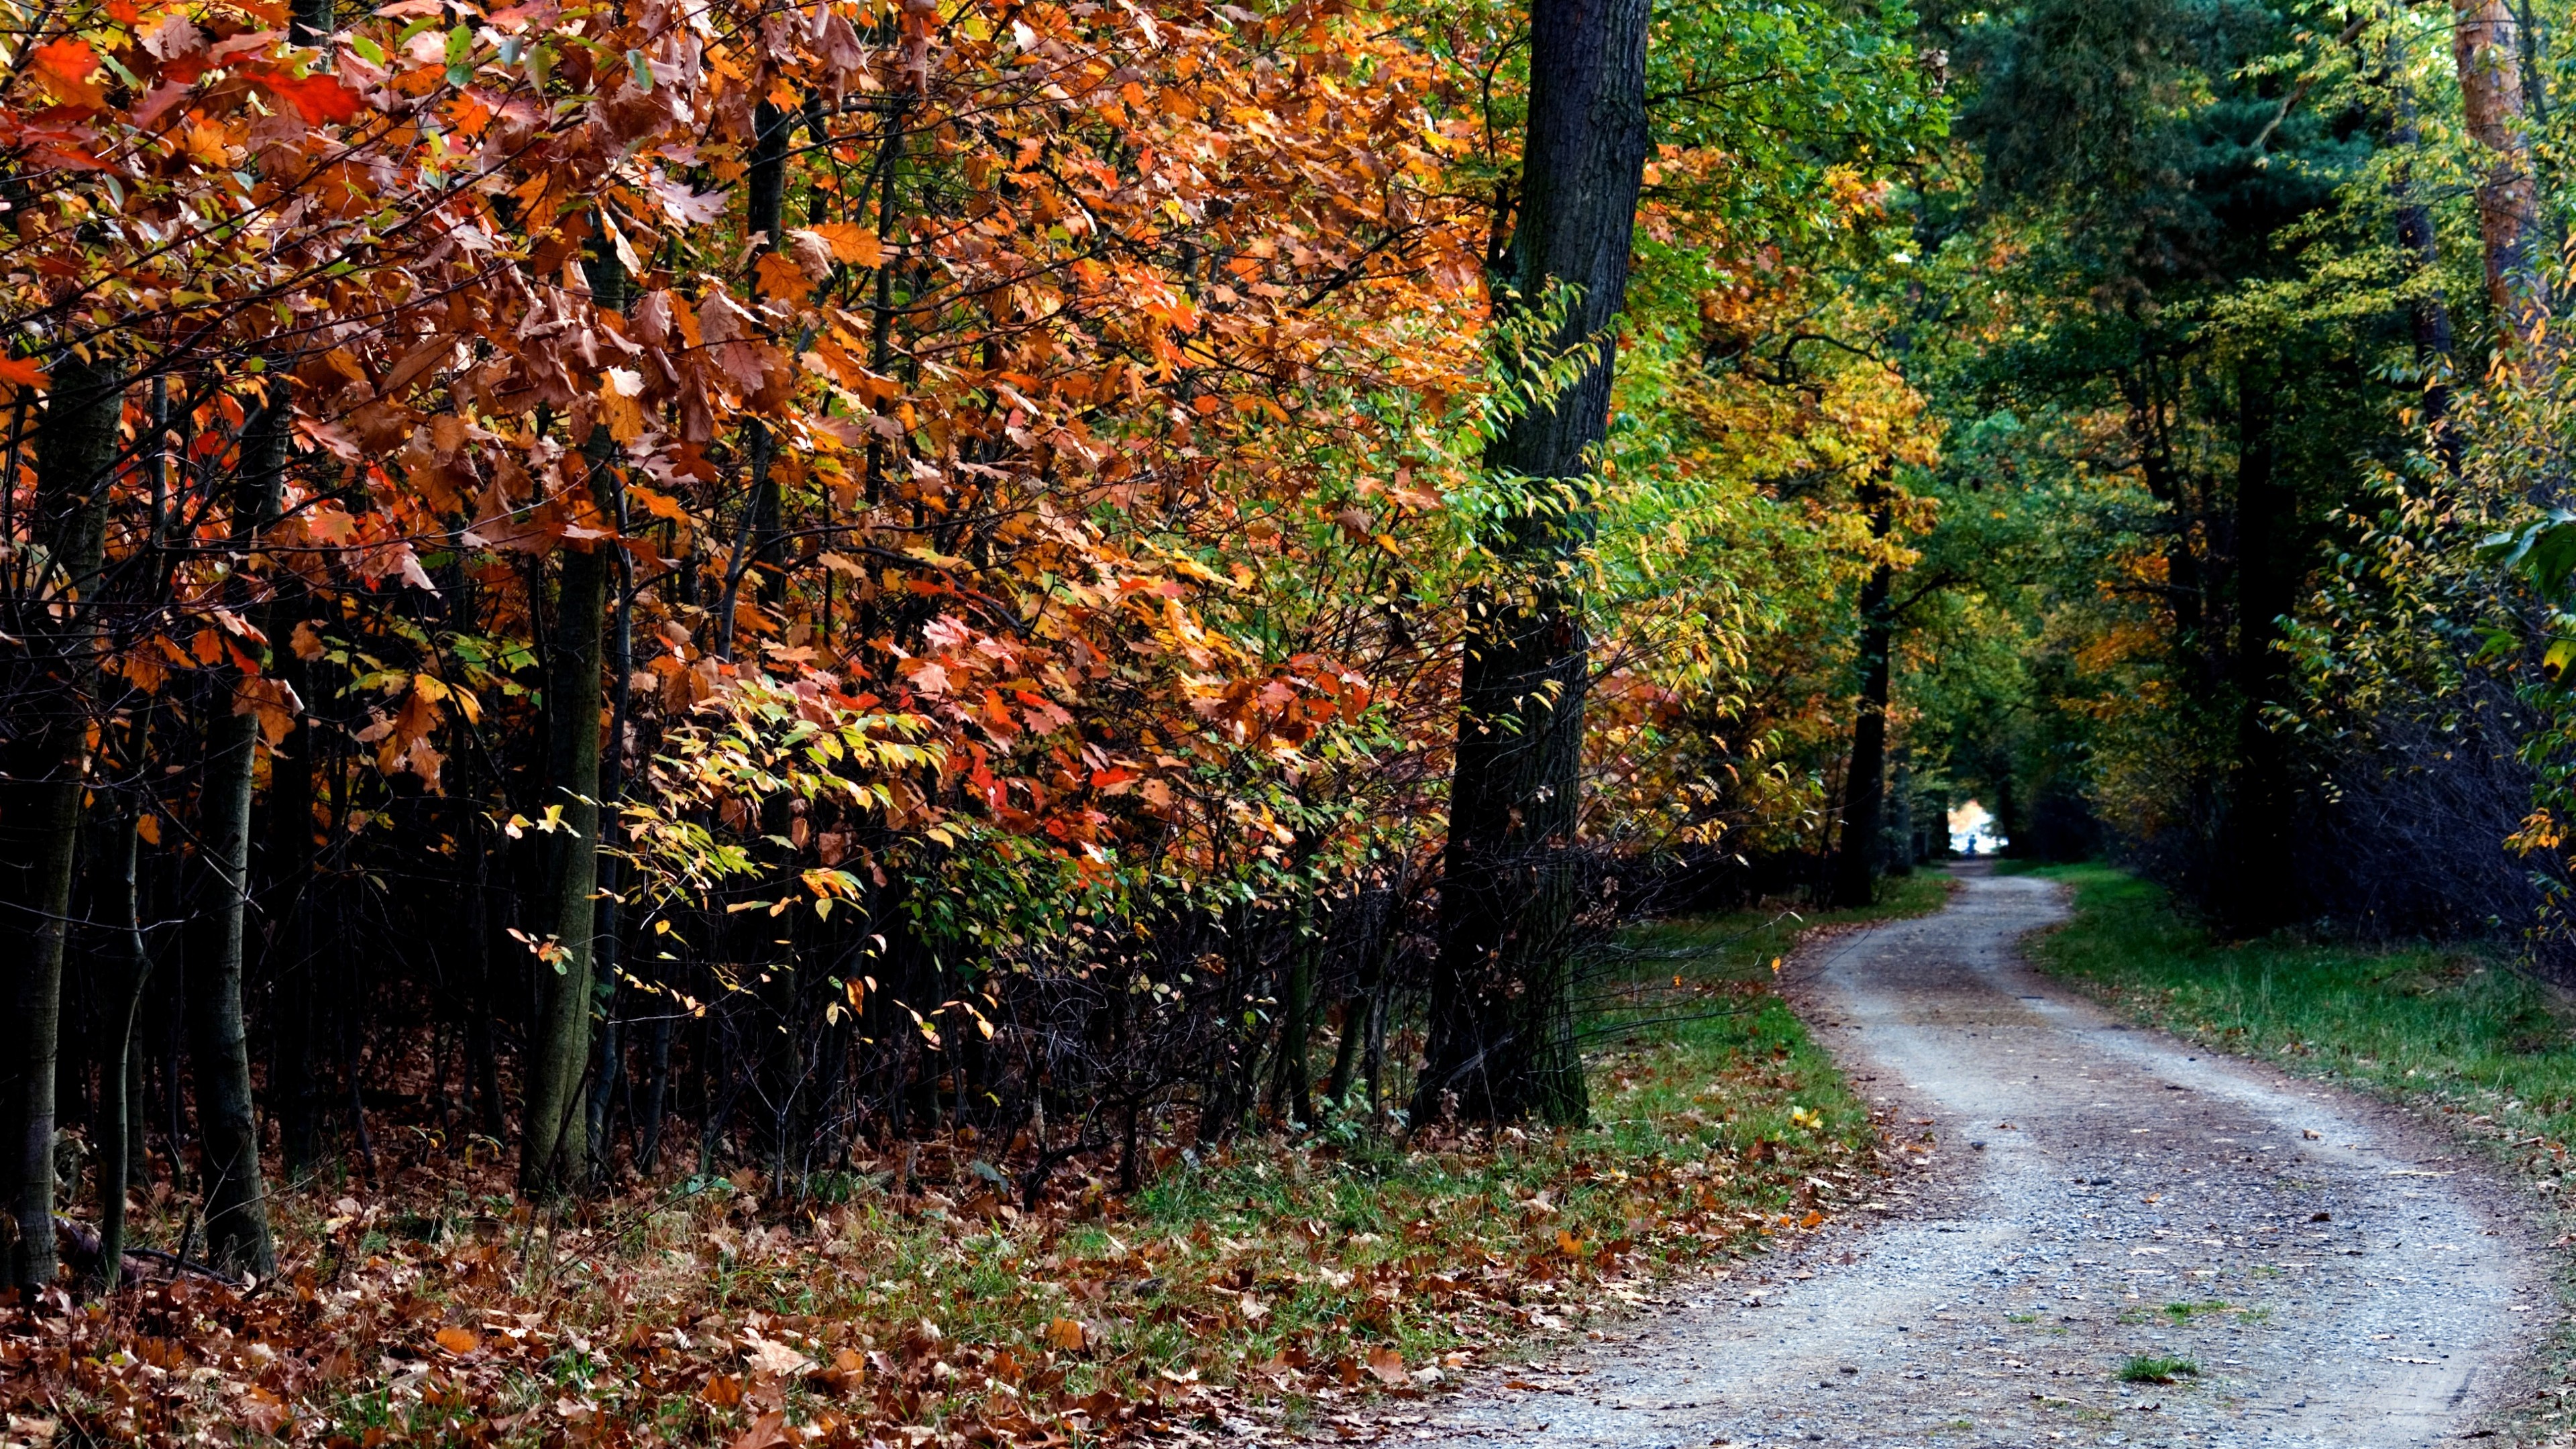 General 3840x2160 forest mountains dirt road leaves trees